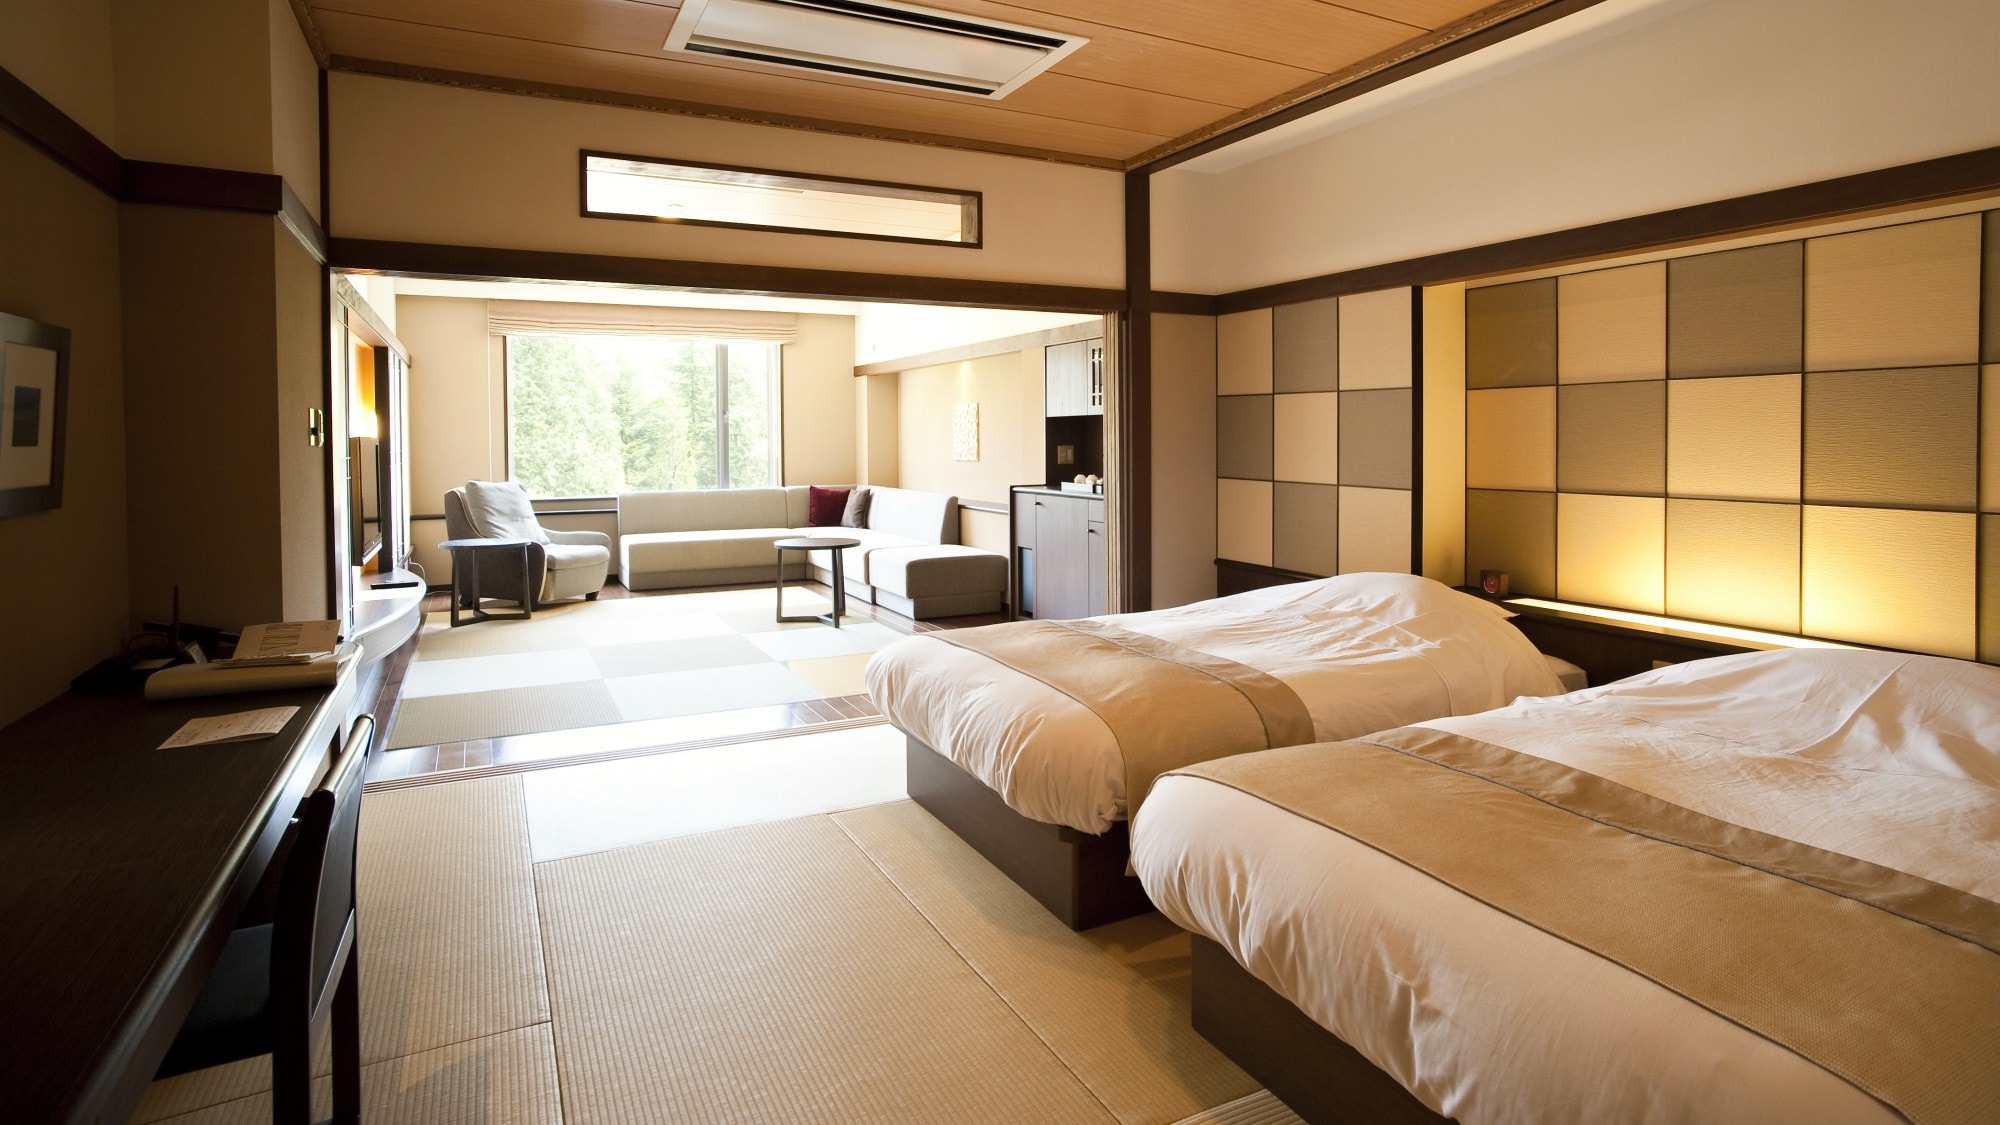 ◆ Japanese-Western style room / Room with a size of 50 square meters or more, where you can spend a relaxing and comfortable time (example of guest room)